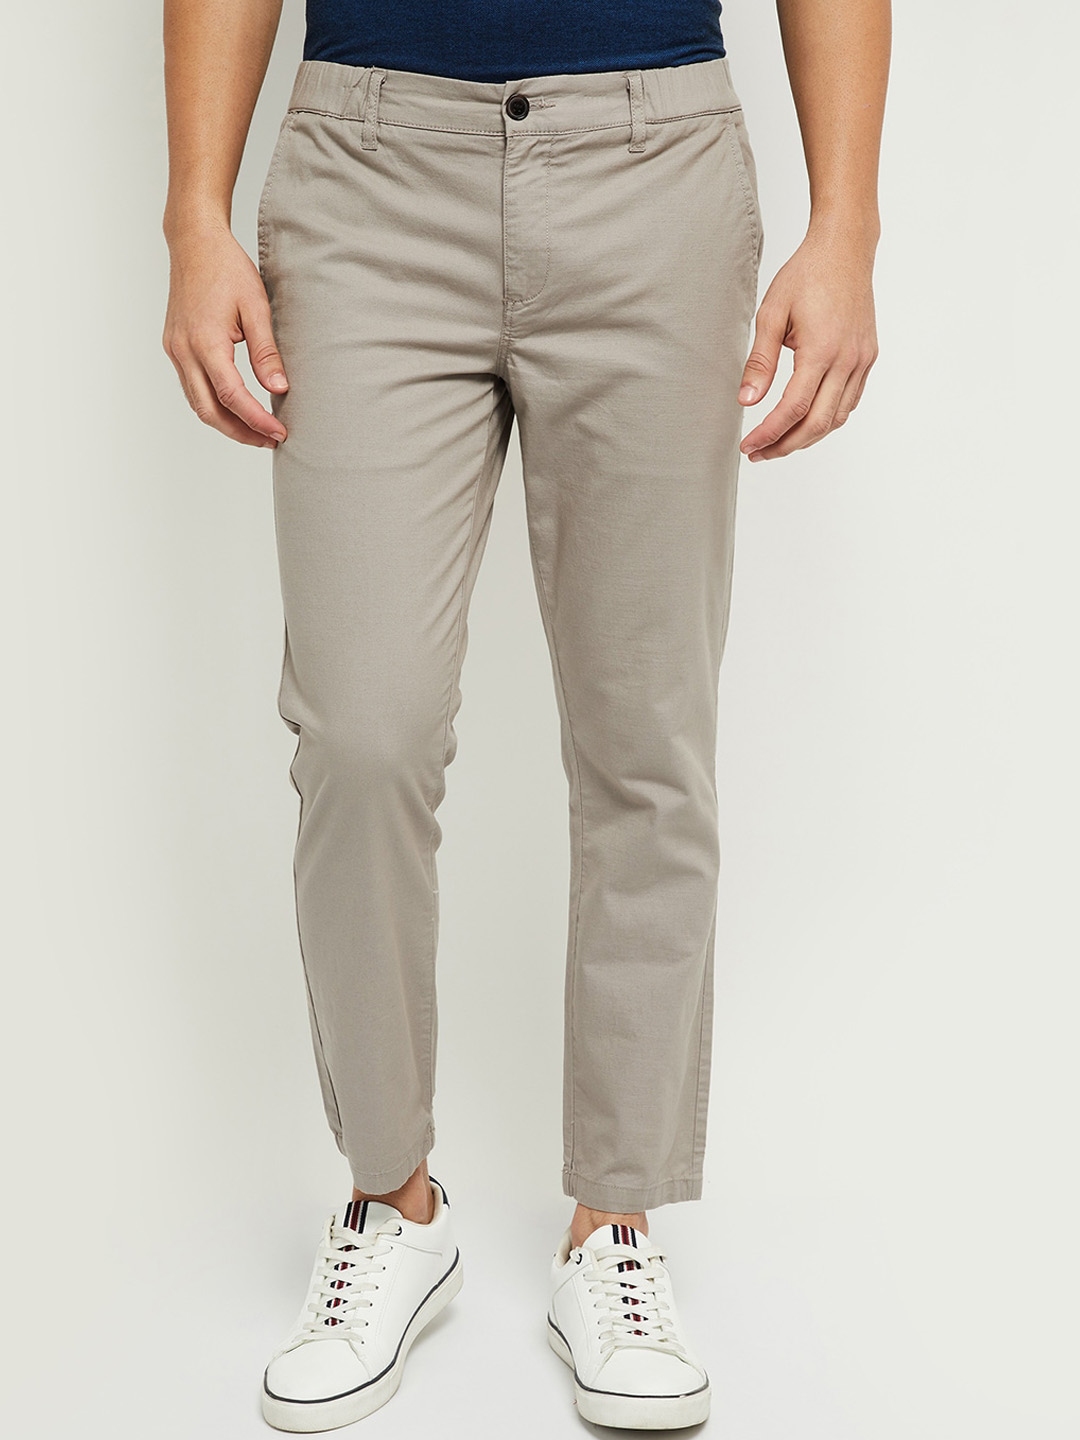 Buy Max Men Grey Chinos Trousers - Trousers for Men 15112694 | Myntra